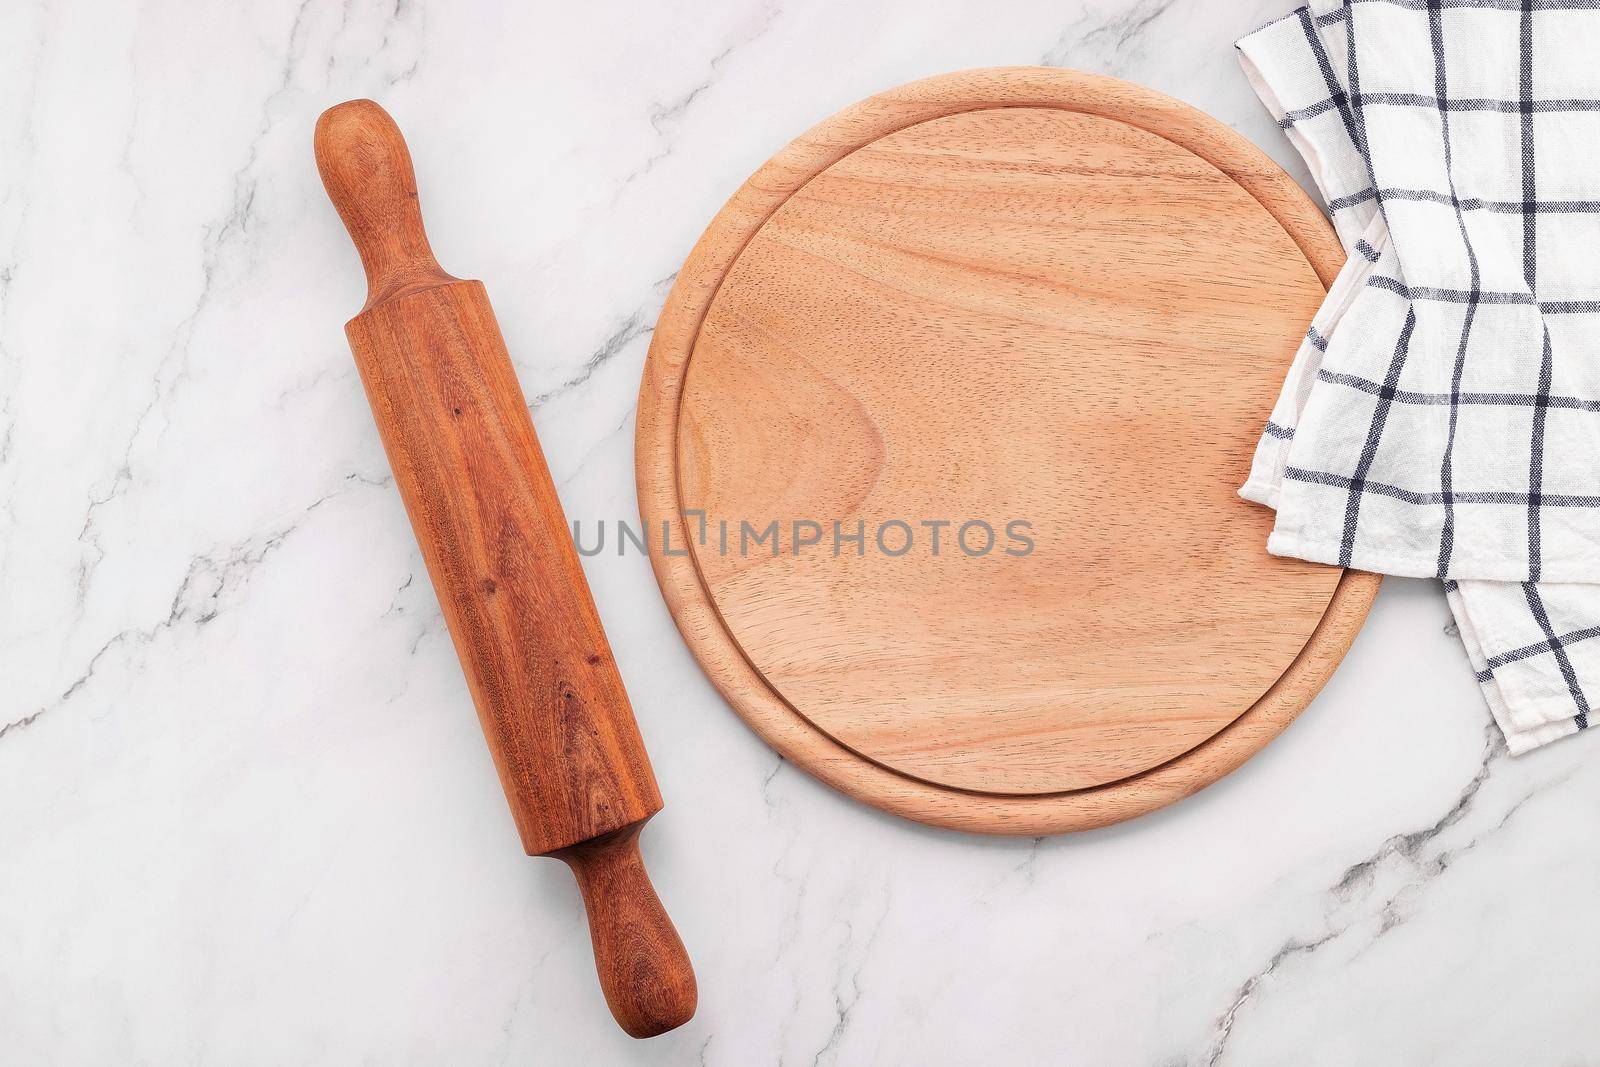 Empty wooden pizza platter with napkin and rolling pin set up on marble stone kitchen table. Pizza board and tablecloth on white marble background. by kerdkanno